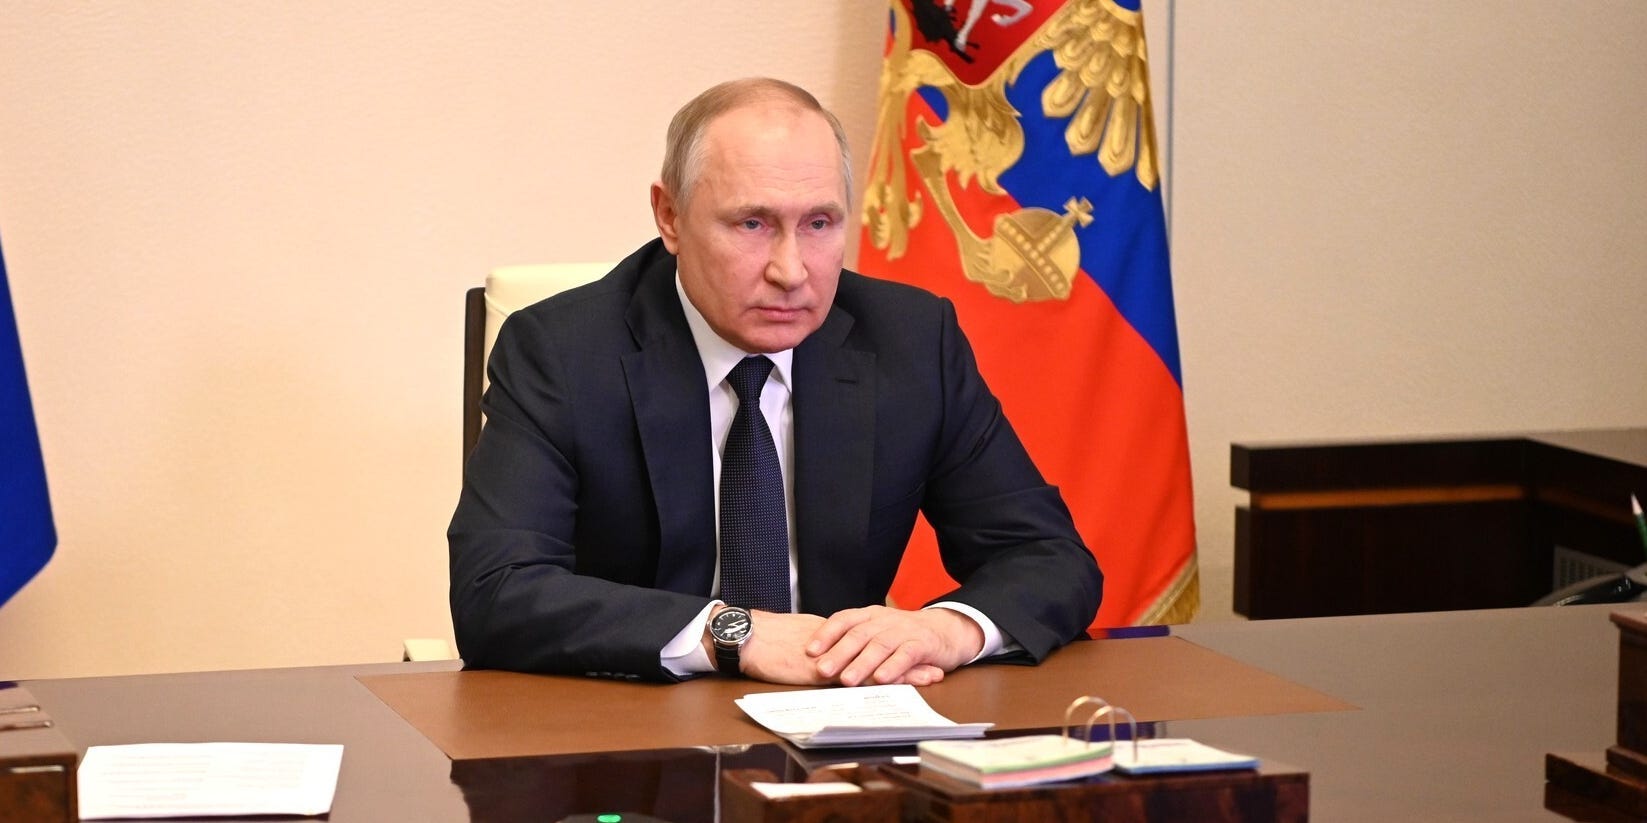 Russian President Vladimir Putin seen on March 03, 2022 in Moscow, Russia.